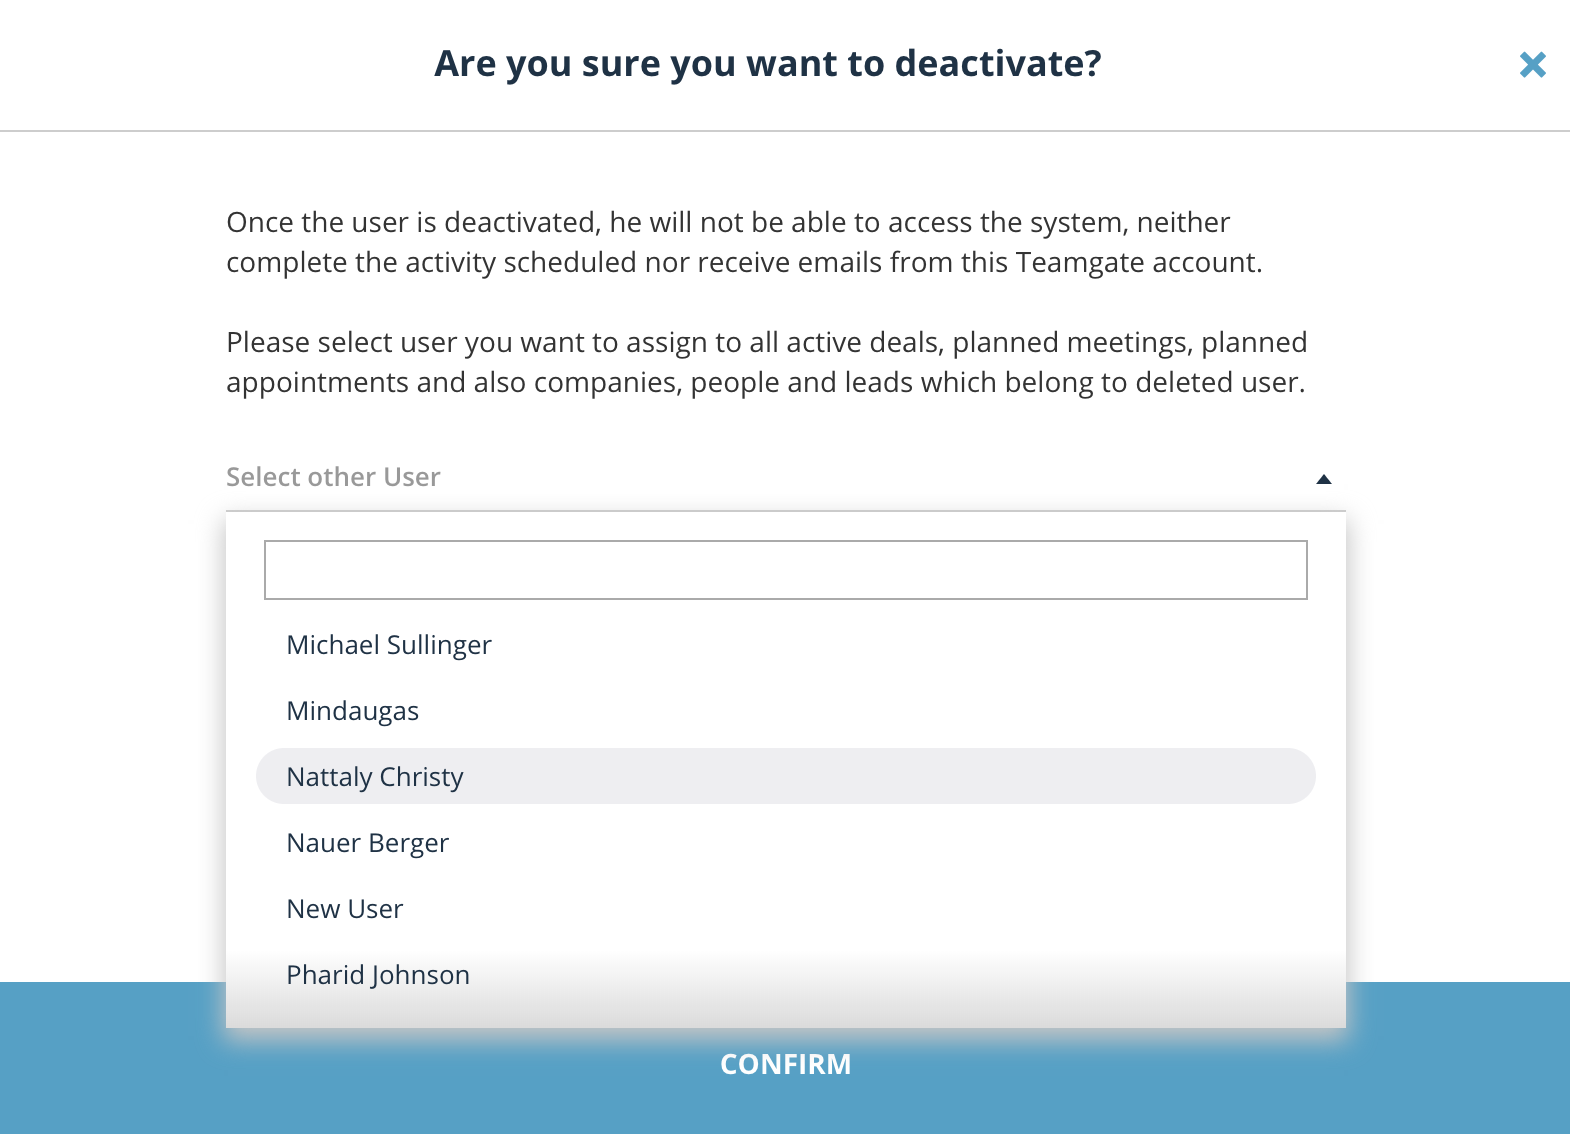 Are-you-sure-you-want-to-deactivate-Teamgate-crm.png